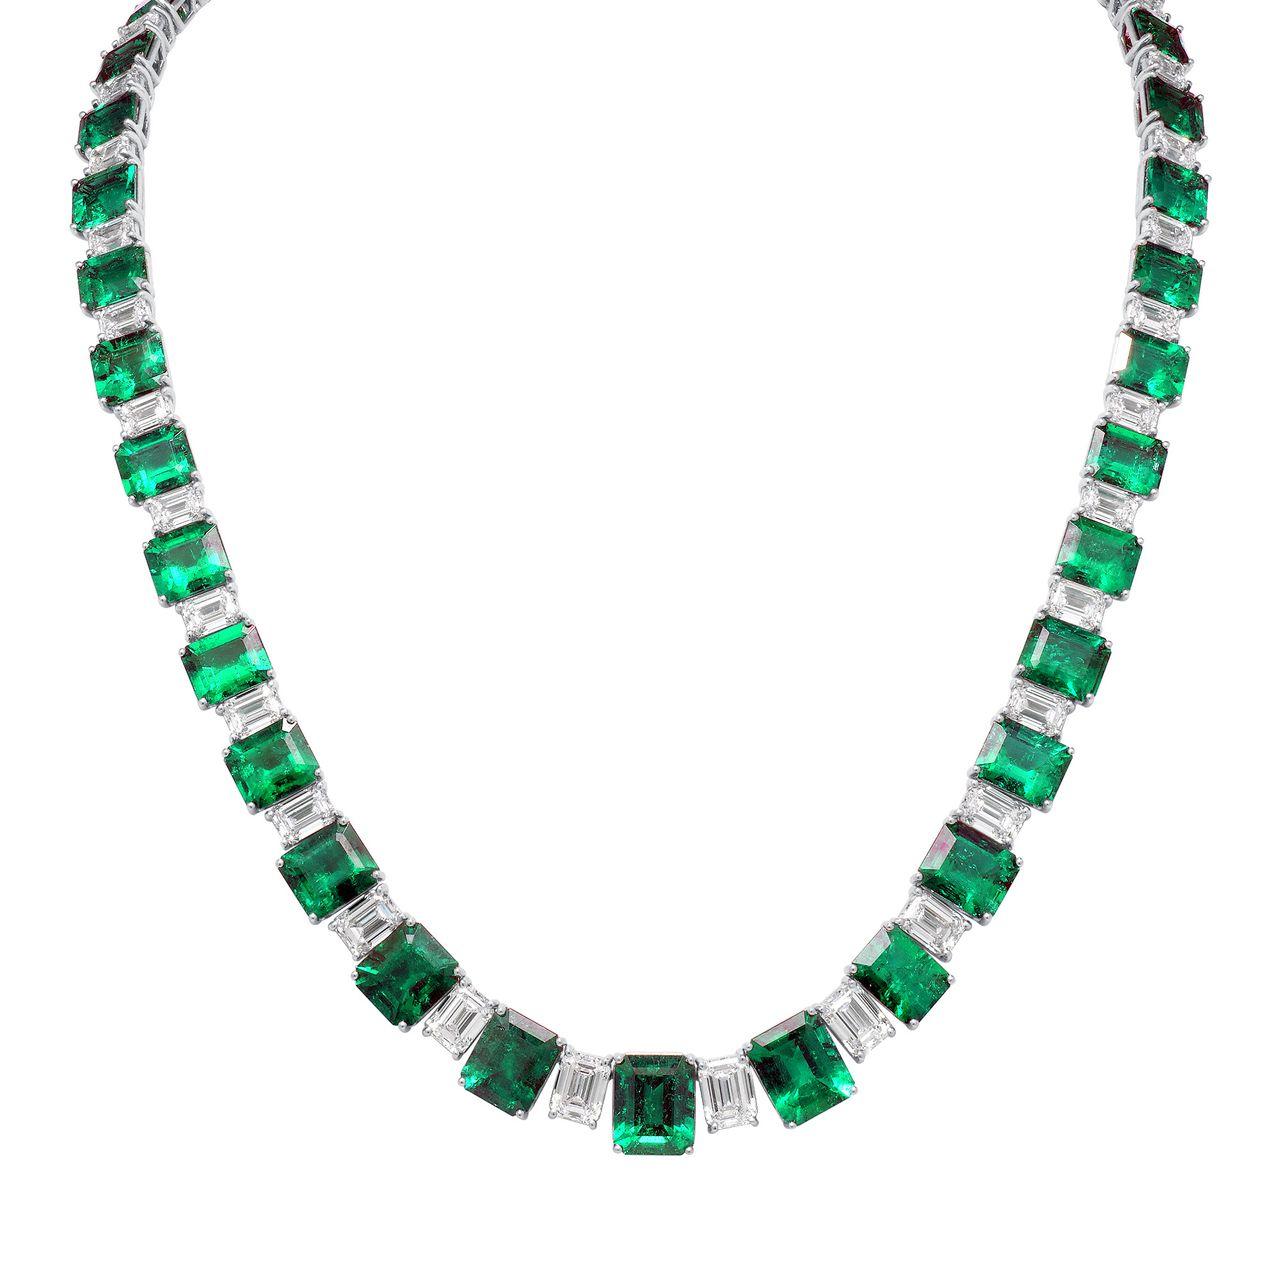 Modern 50 Carat Exquisite Colombian Emerald Necklace For Sale